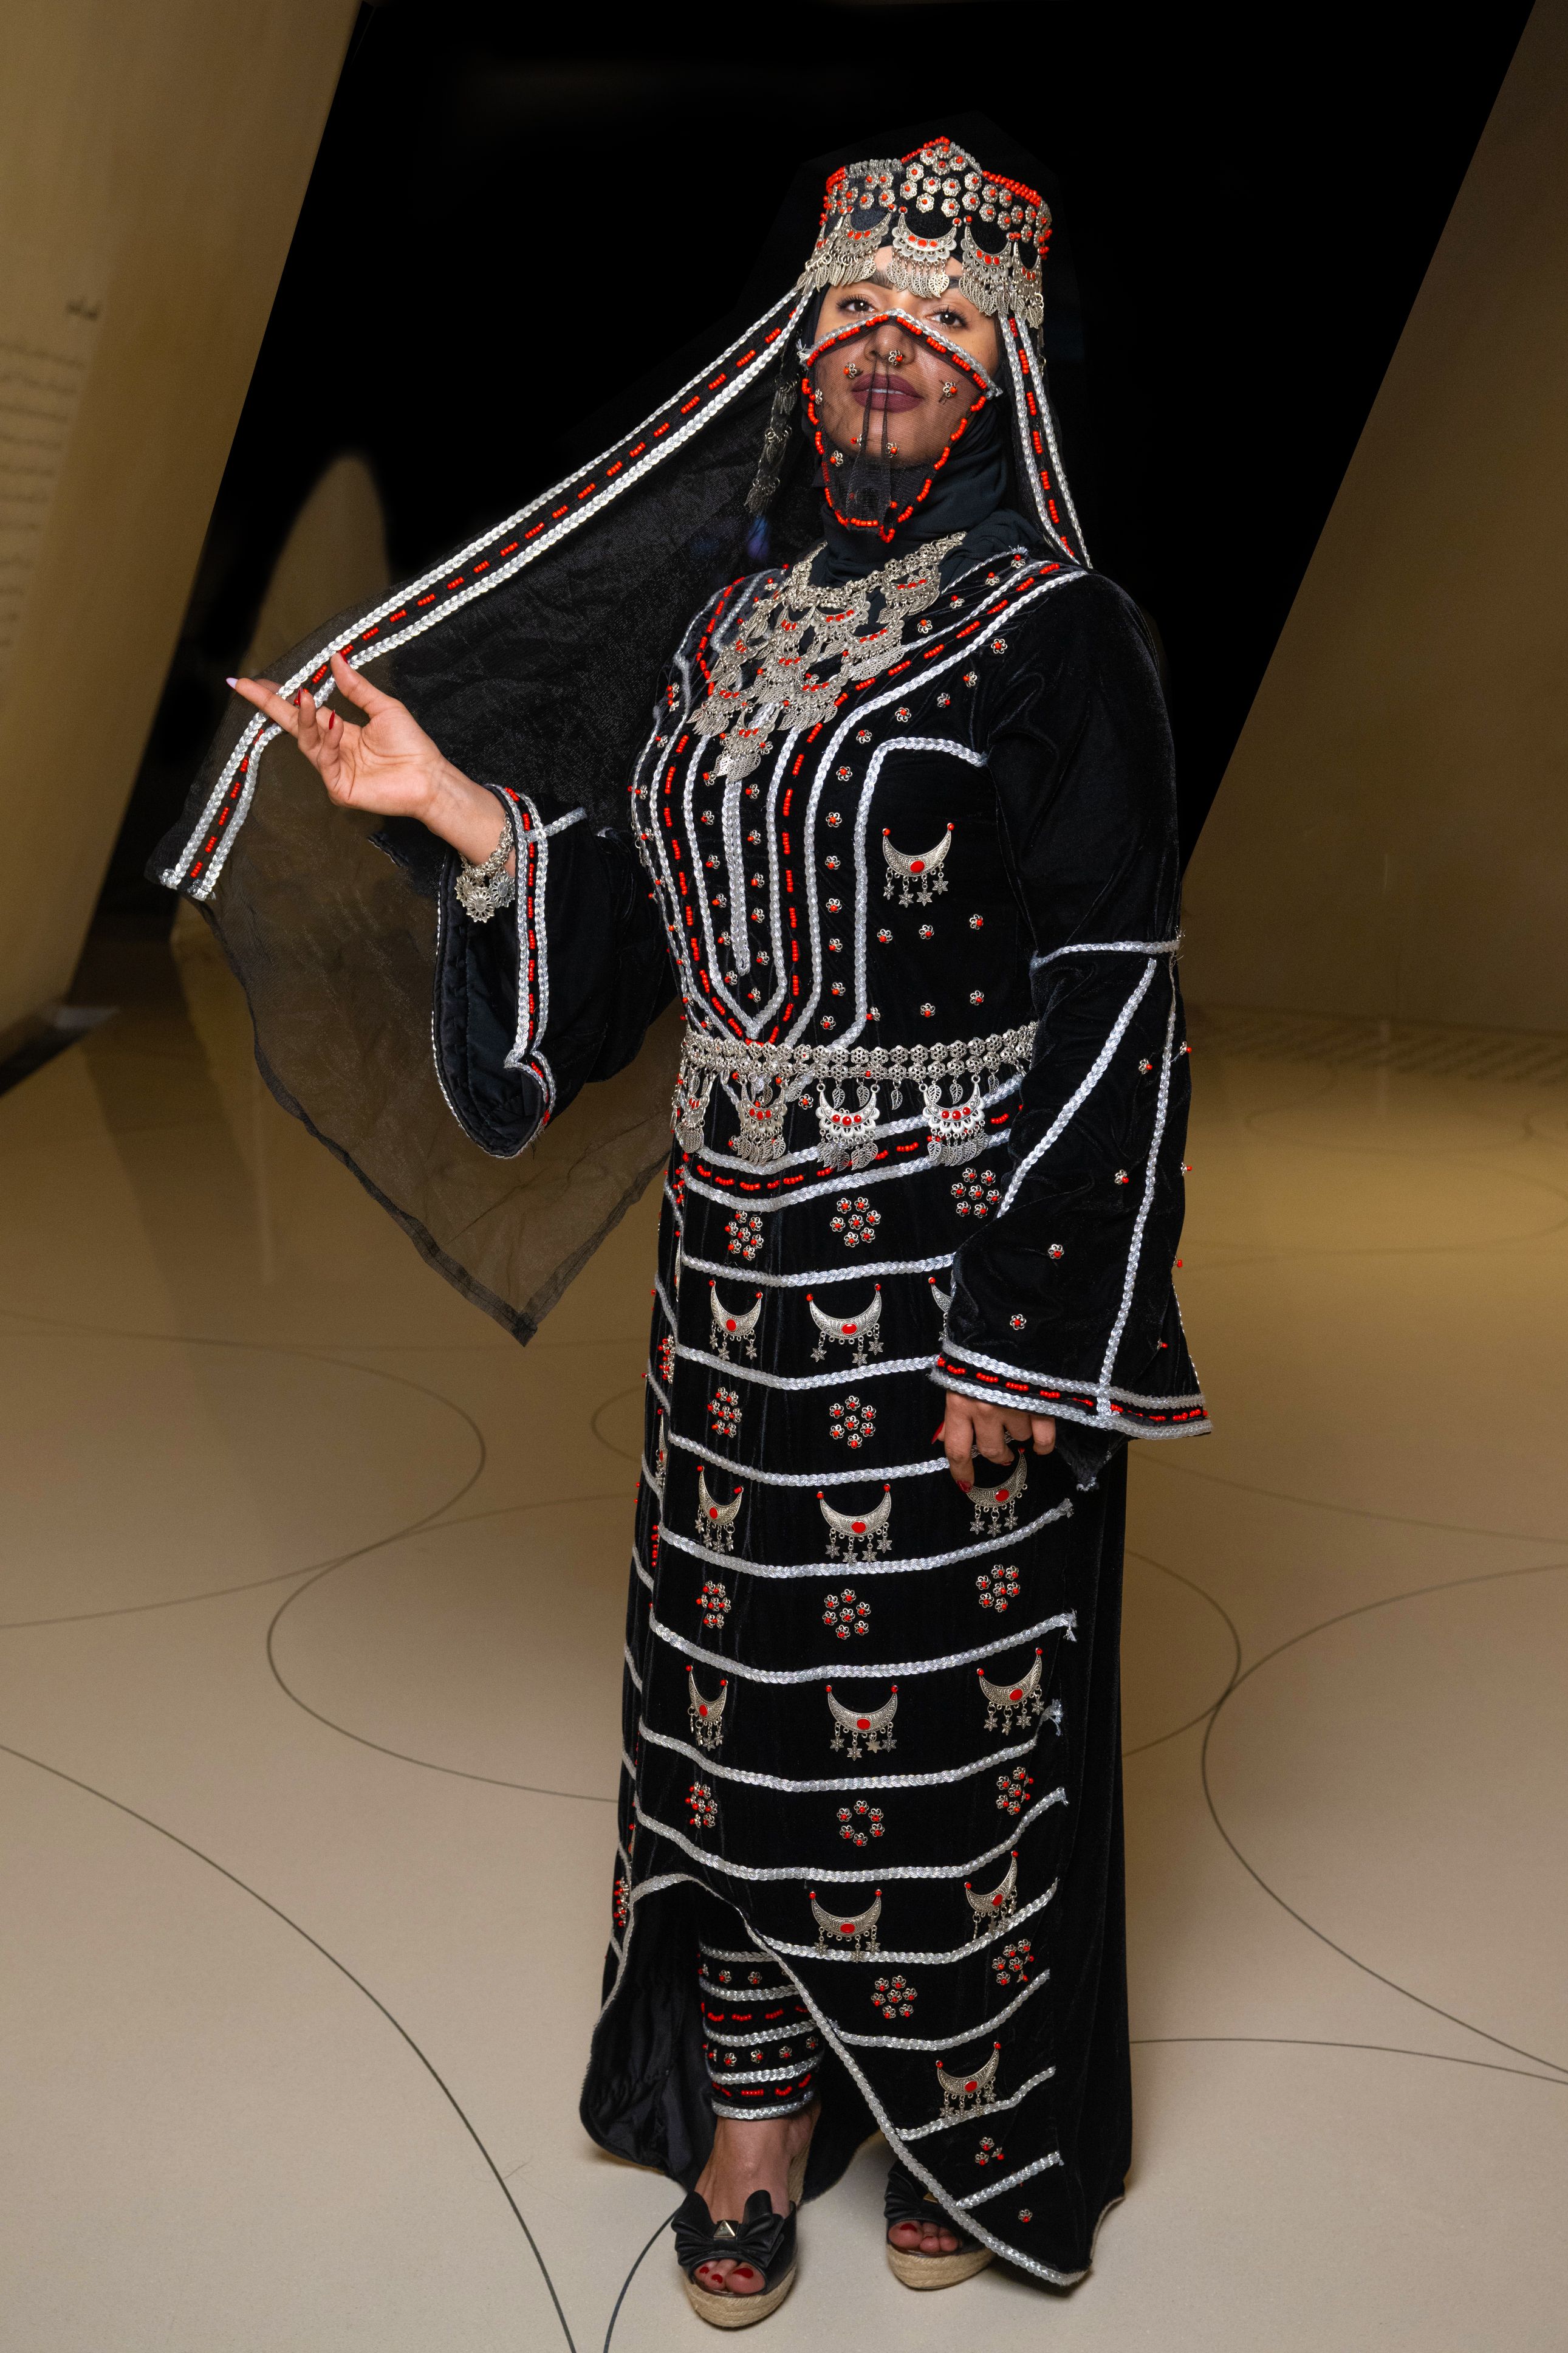 Woman modelling a traditional Yemeni velvet dress worn with a traditional silver necklace, veil and headpiece.